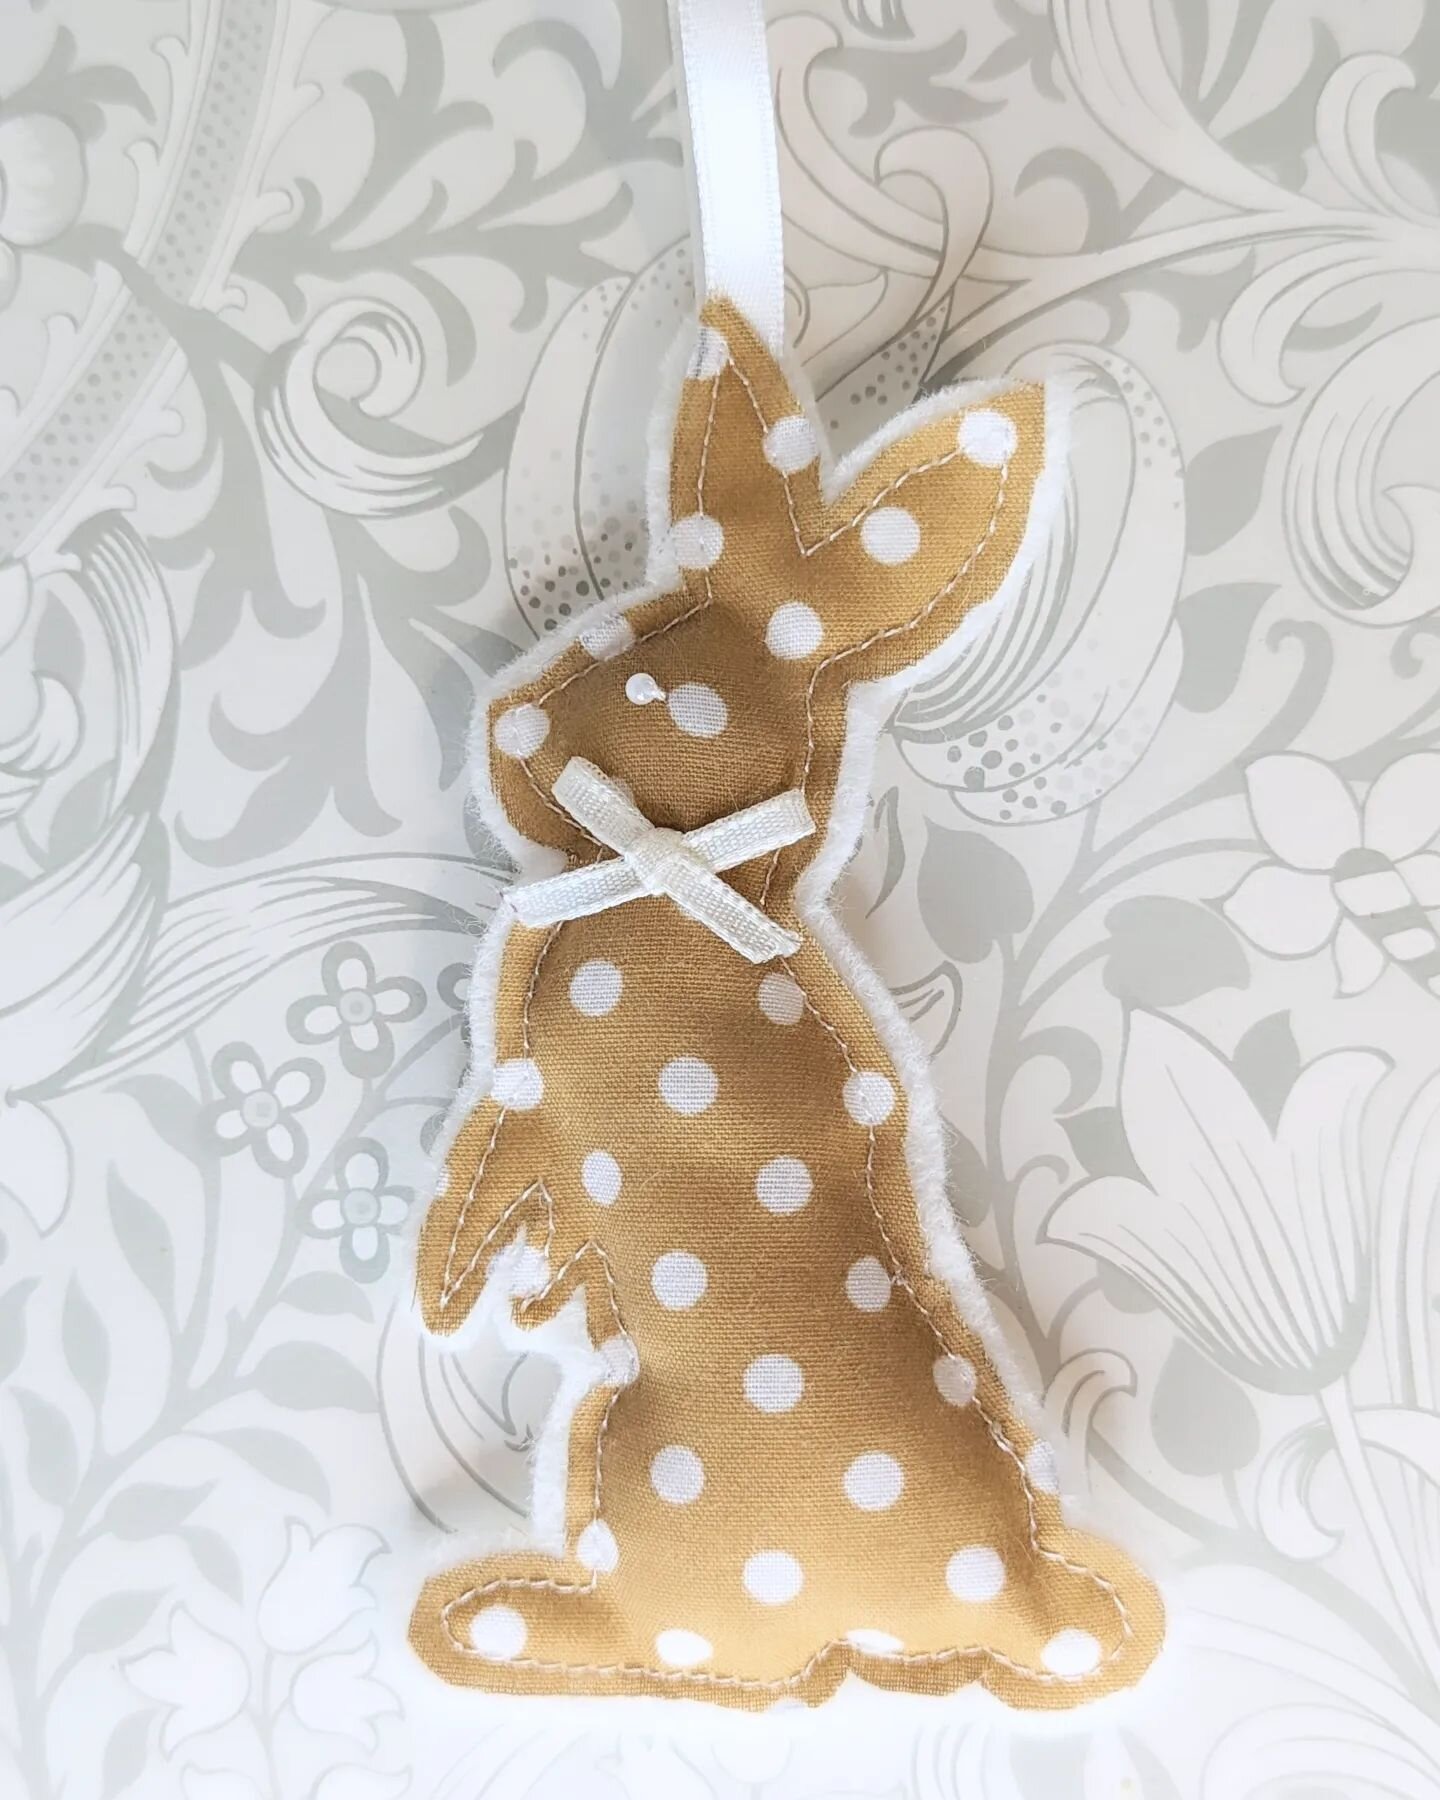 ✨ The Easter Bunny 🐇 ✨

Happy Sunday everyone. The weather up North is absolutely beautiful crisp and sunny! Thought I'd Share some more creations I'll be releasing soon in time for Easter 🐣they'll be limited stock available in three colour ways! P